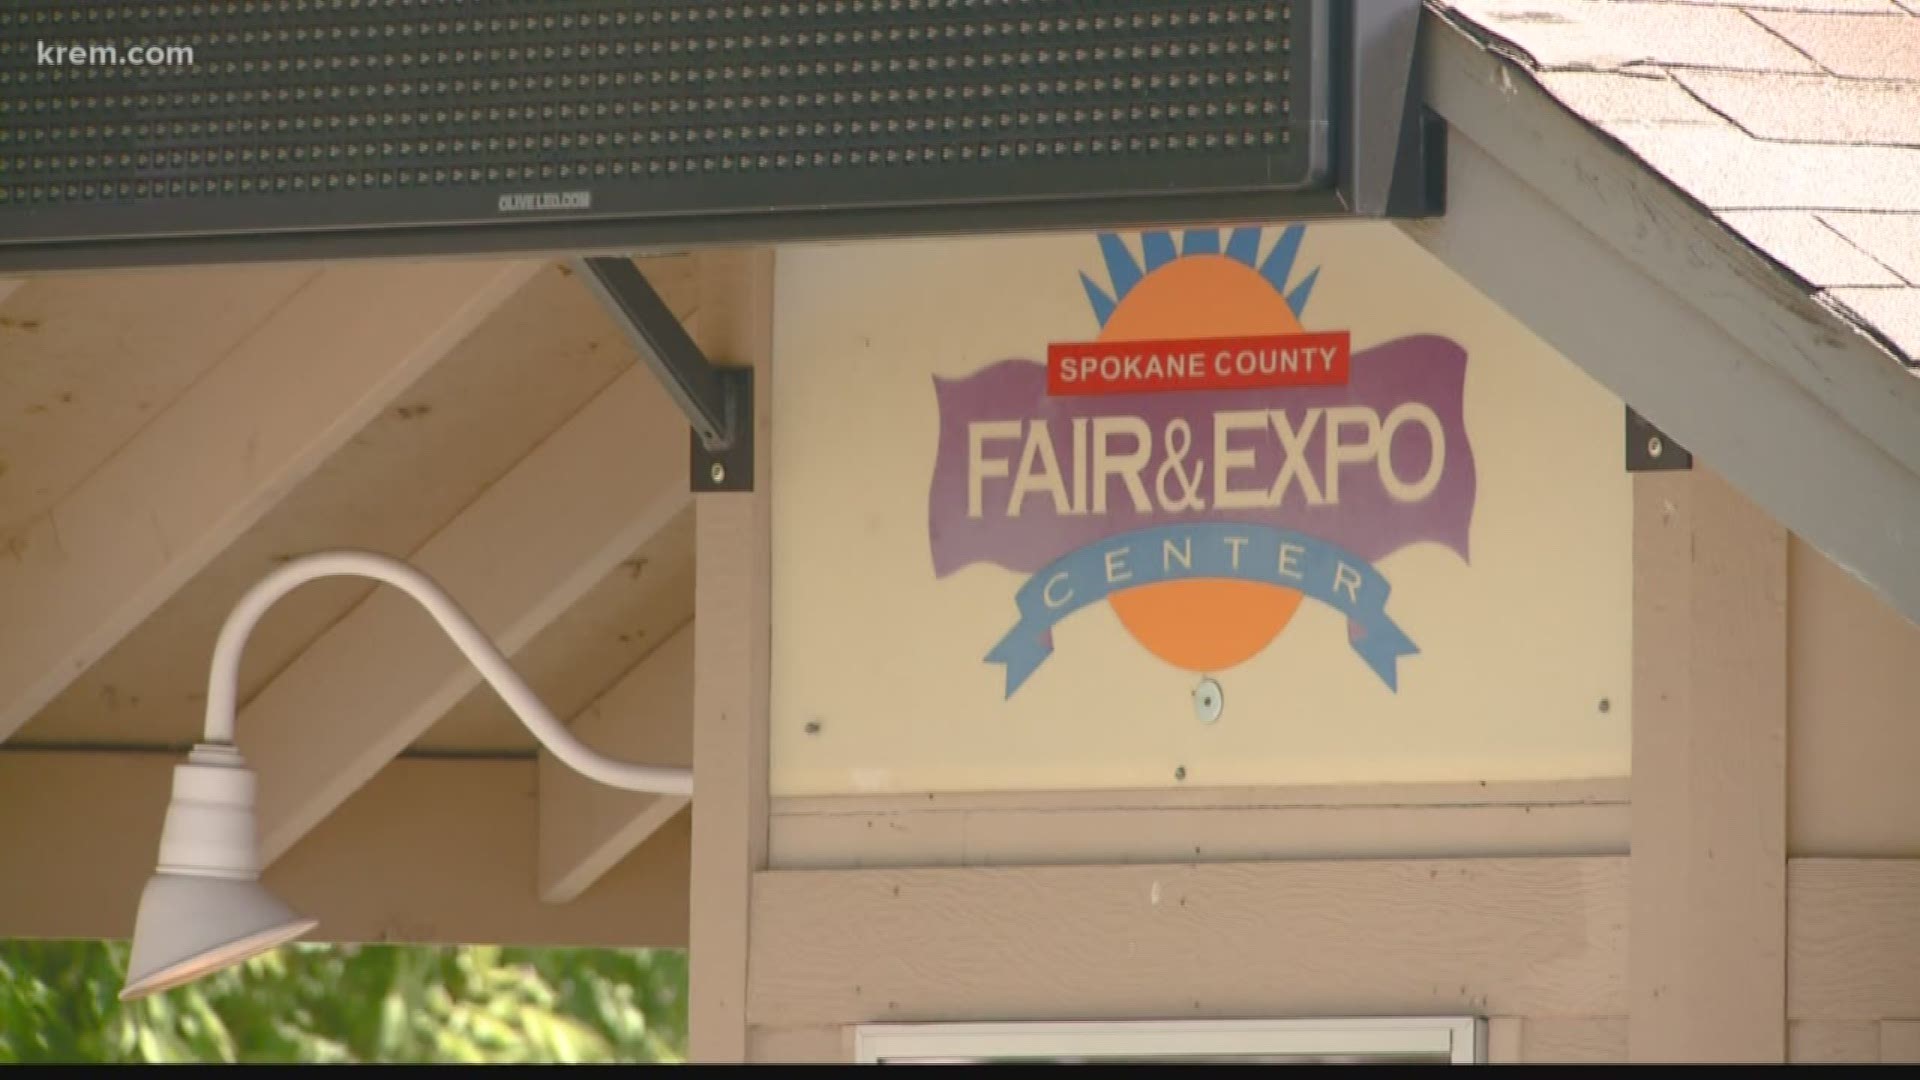 KREM's Brandon Jones spoke with Spokane Fairgrounds leaders about the controversy surrounding Liberty State's booth at the upcoming Spokane Interstate Fair.